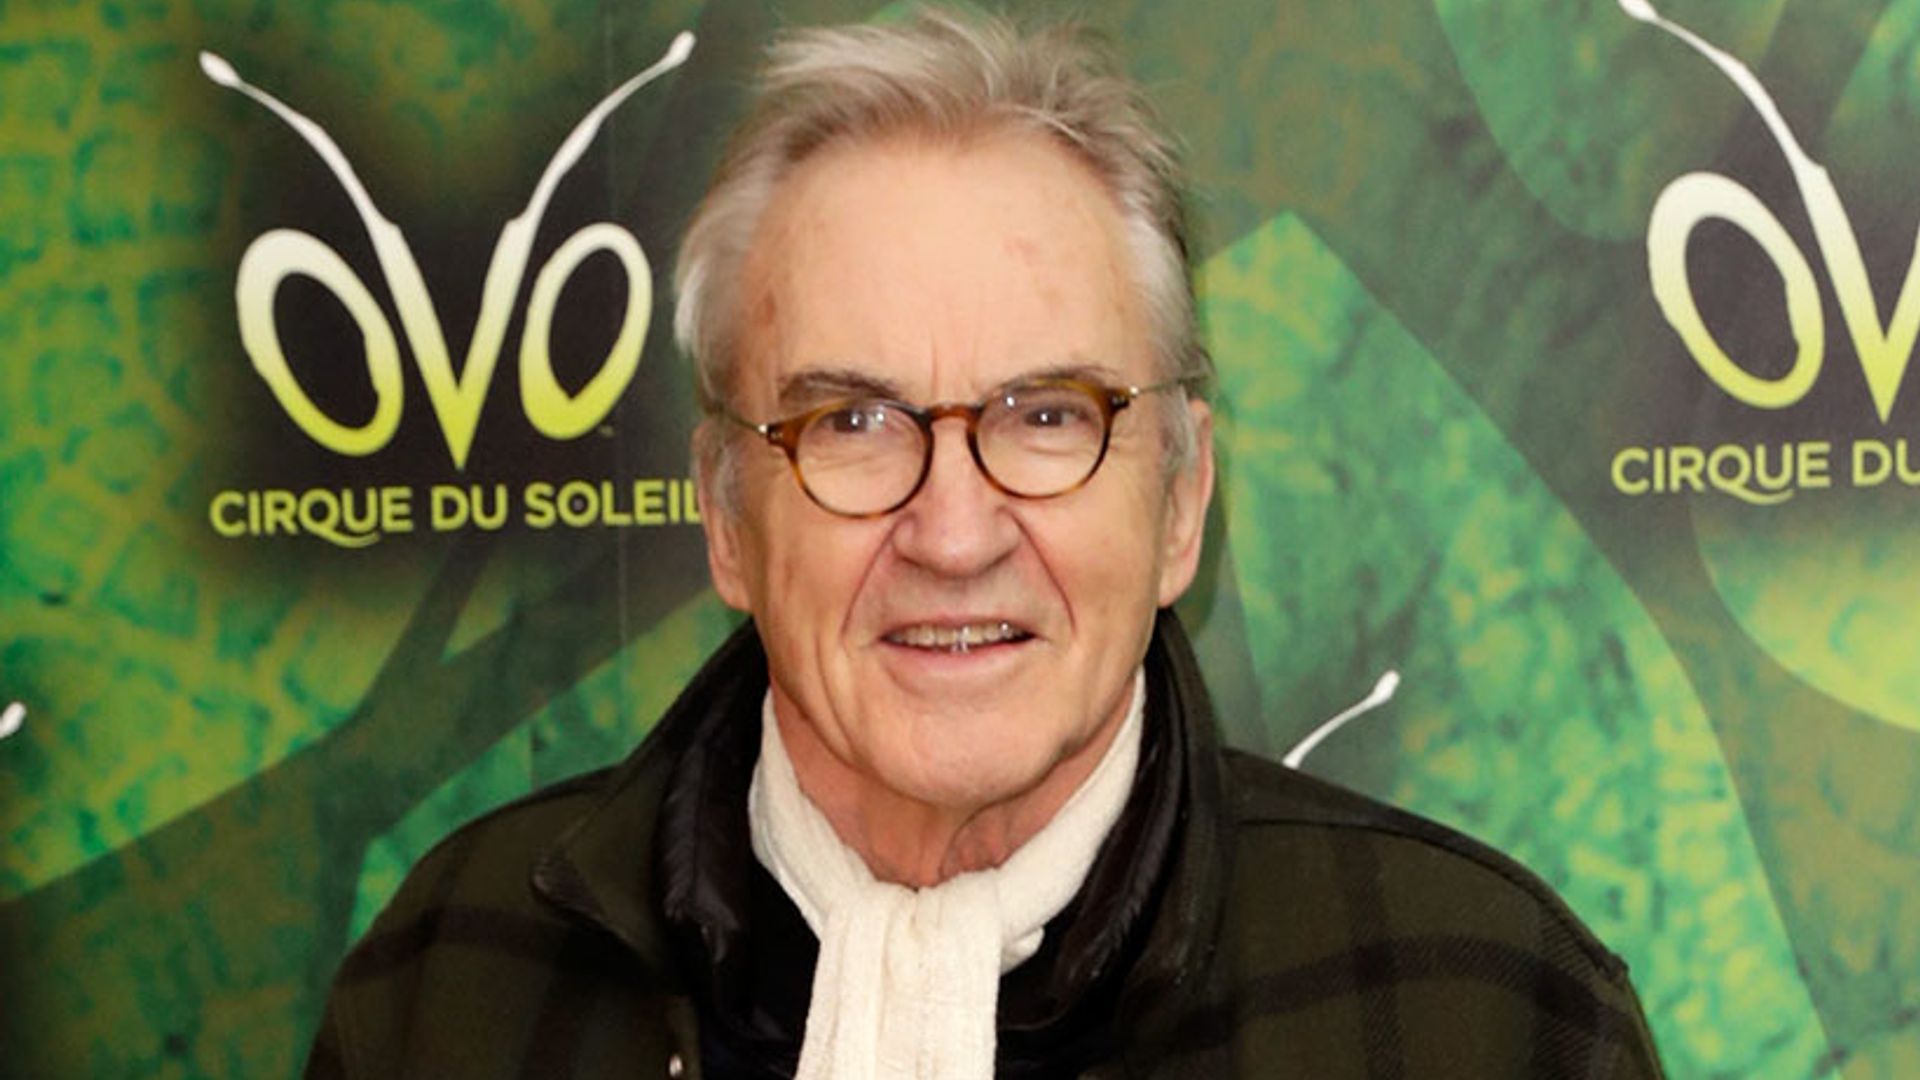 Former EastEnders actor Larry Lamb opens up about finding romance again